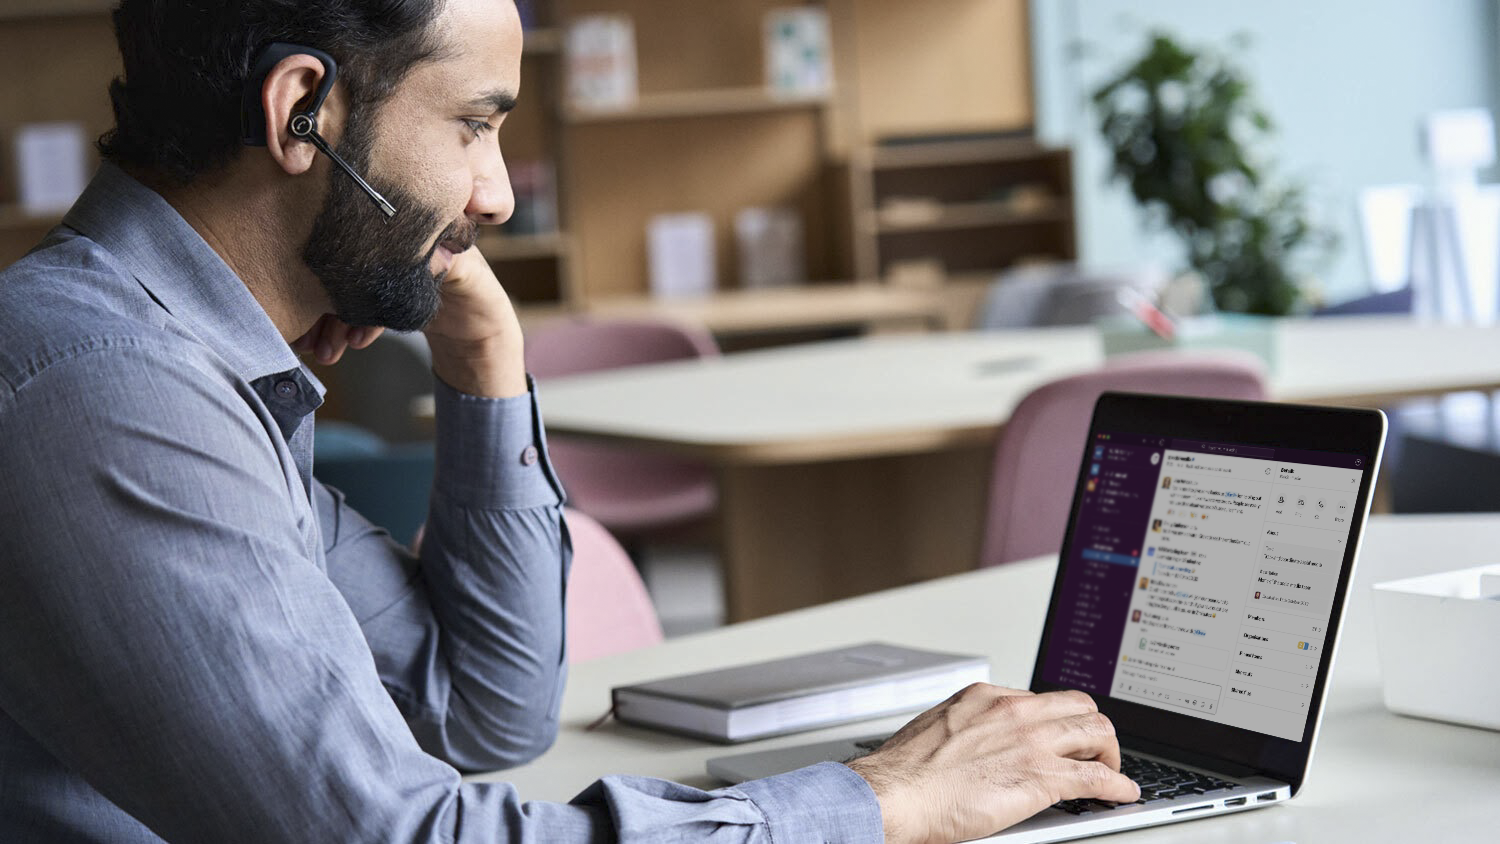 A man with a beard and headset at a deck uses slack on a laptop 